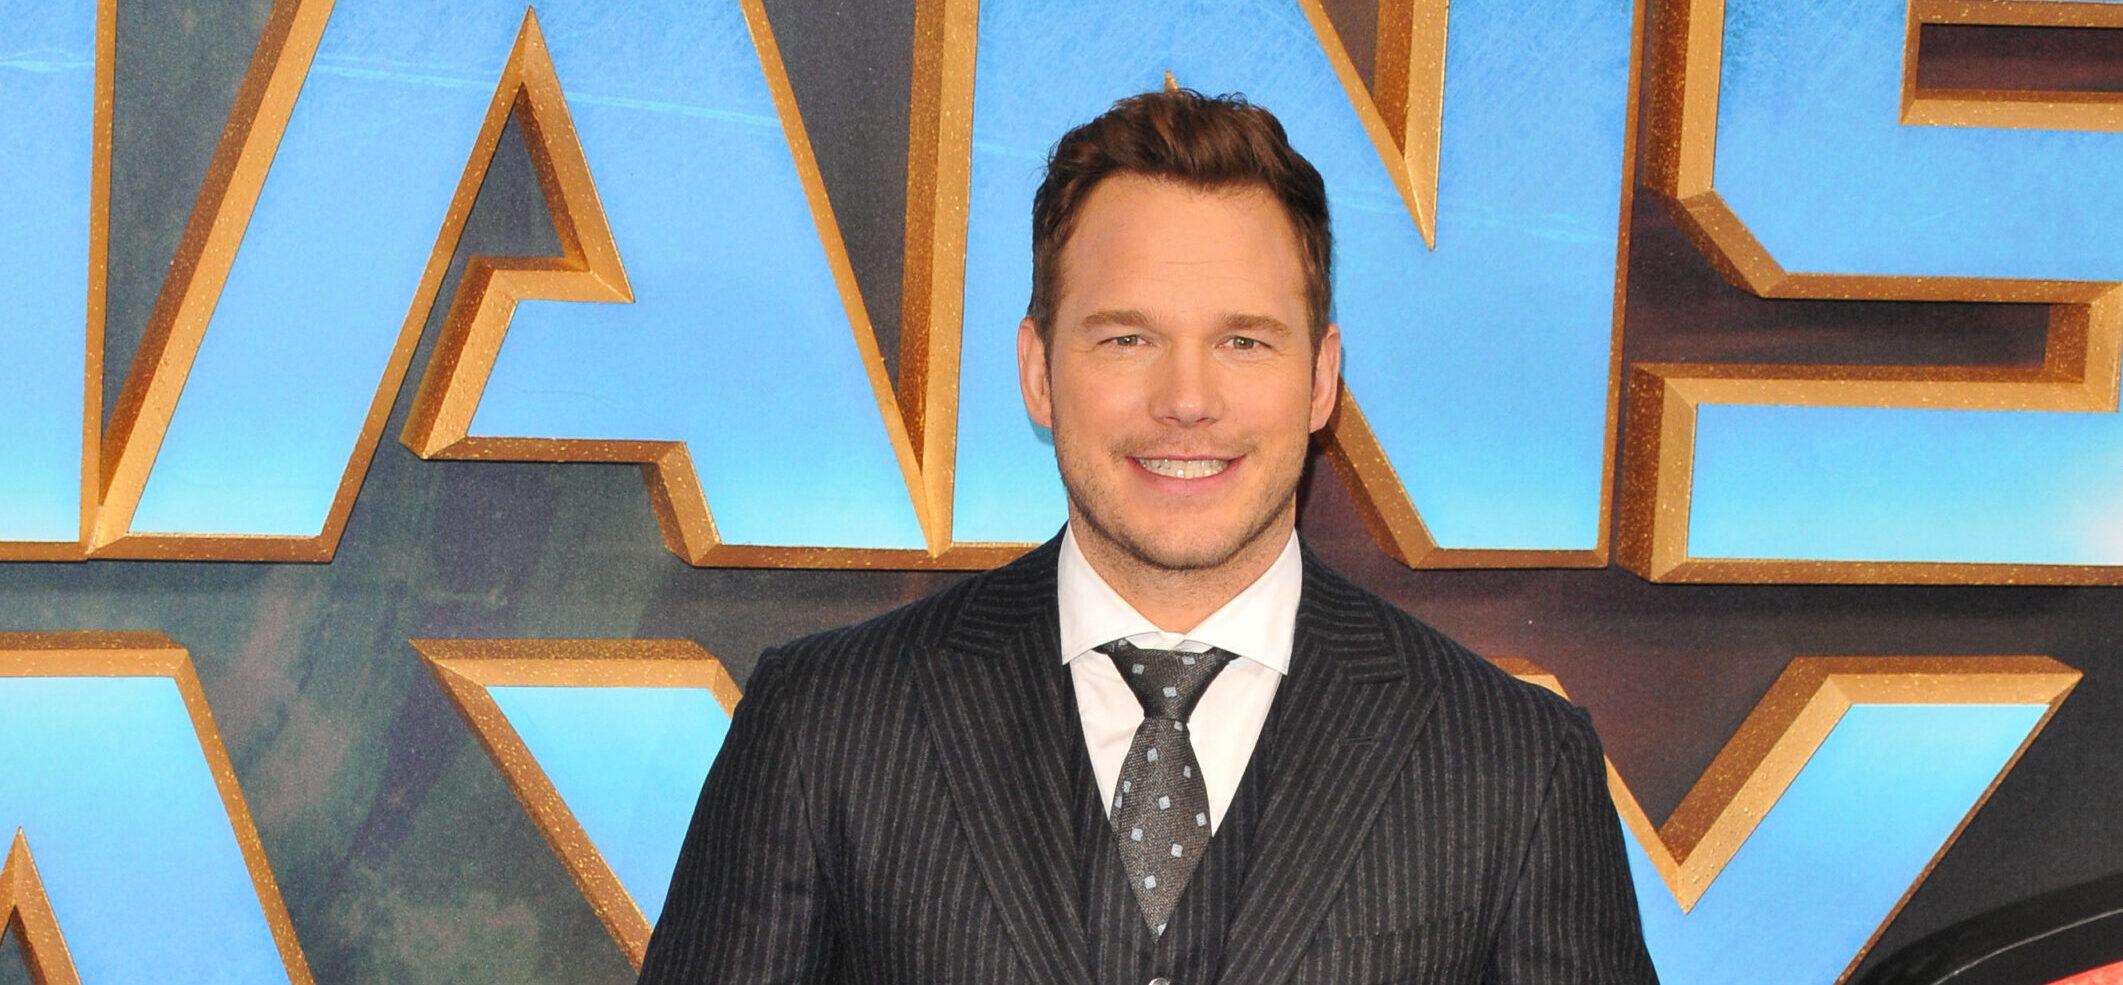 Chris Pratt's Controversial Ranking Of 'Guardians Of The Galaxy' Songs